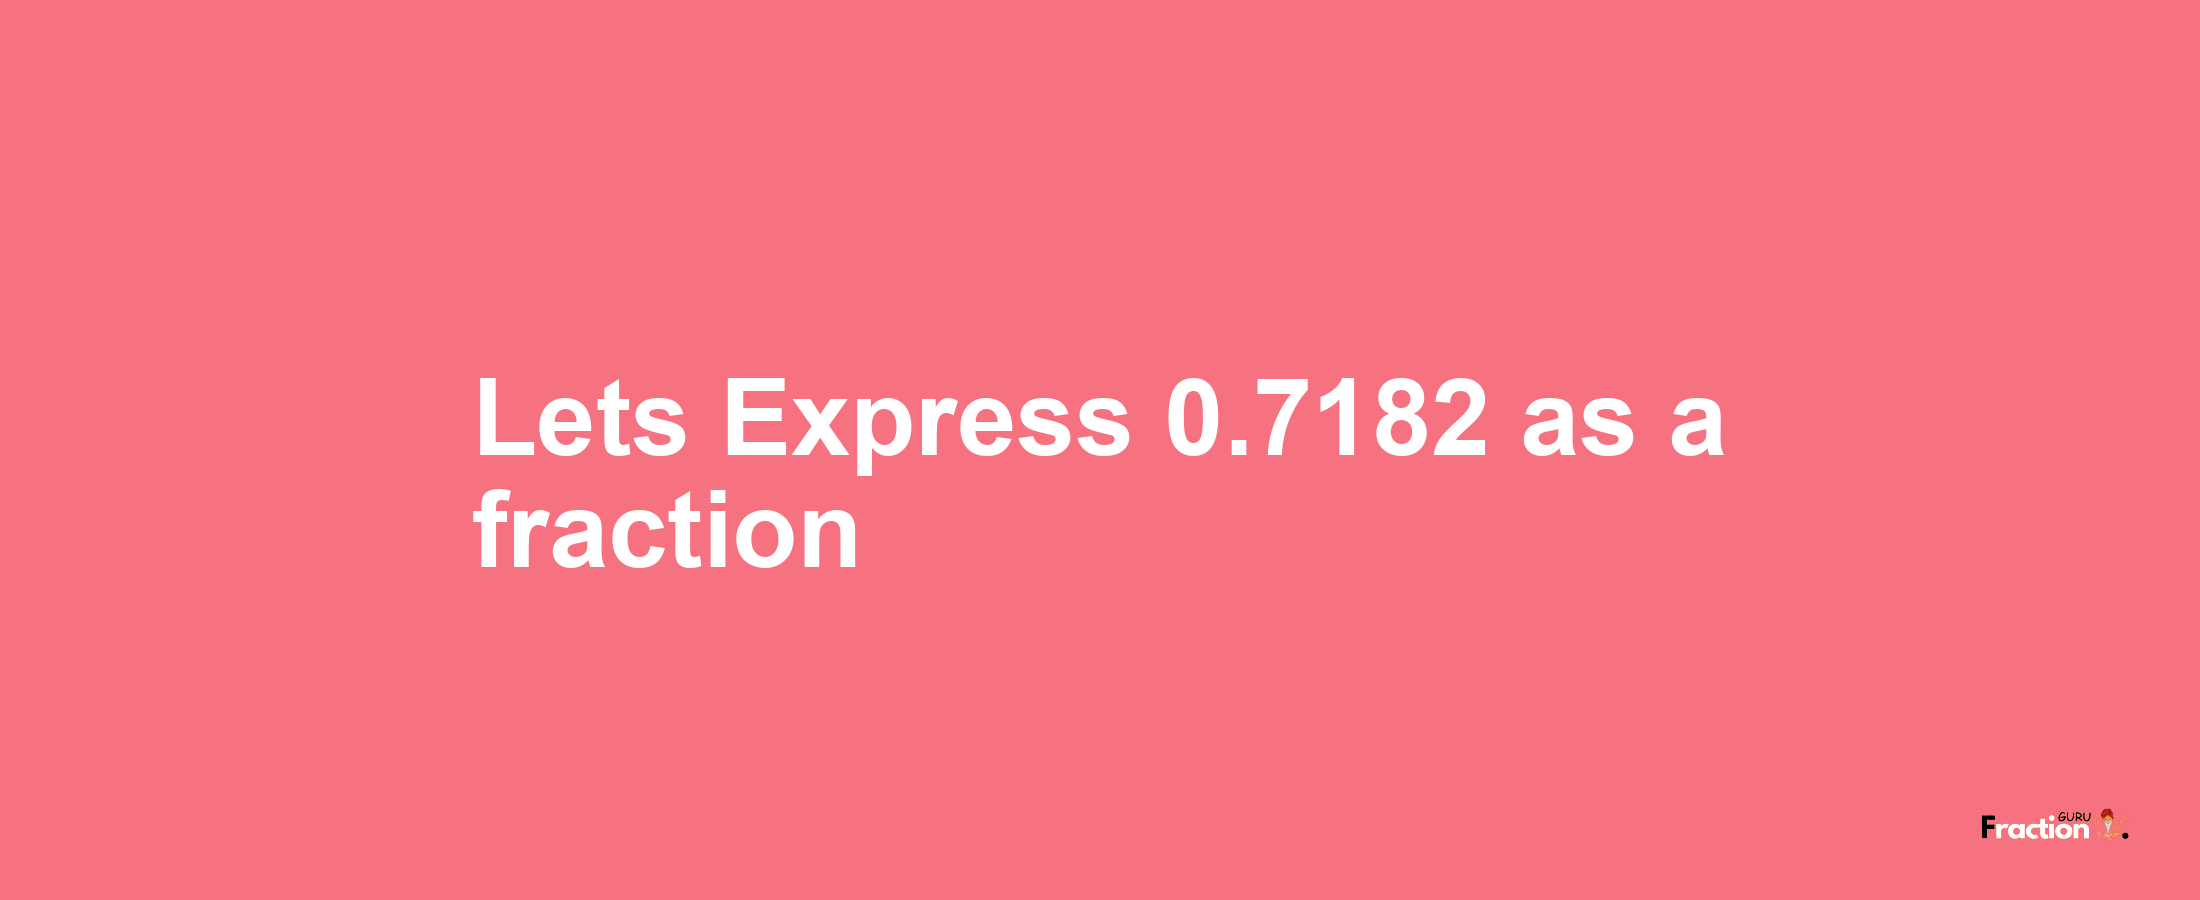 Lets Express 0.7182 as afraction